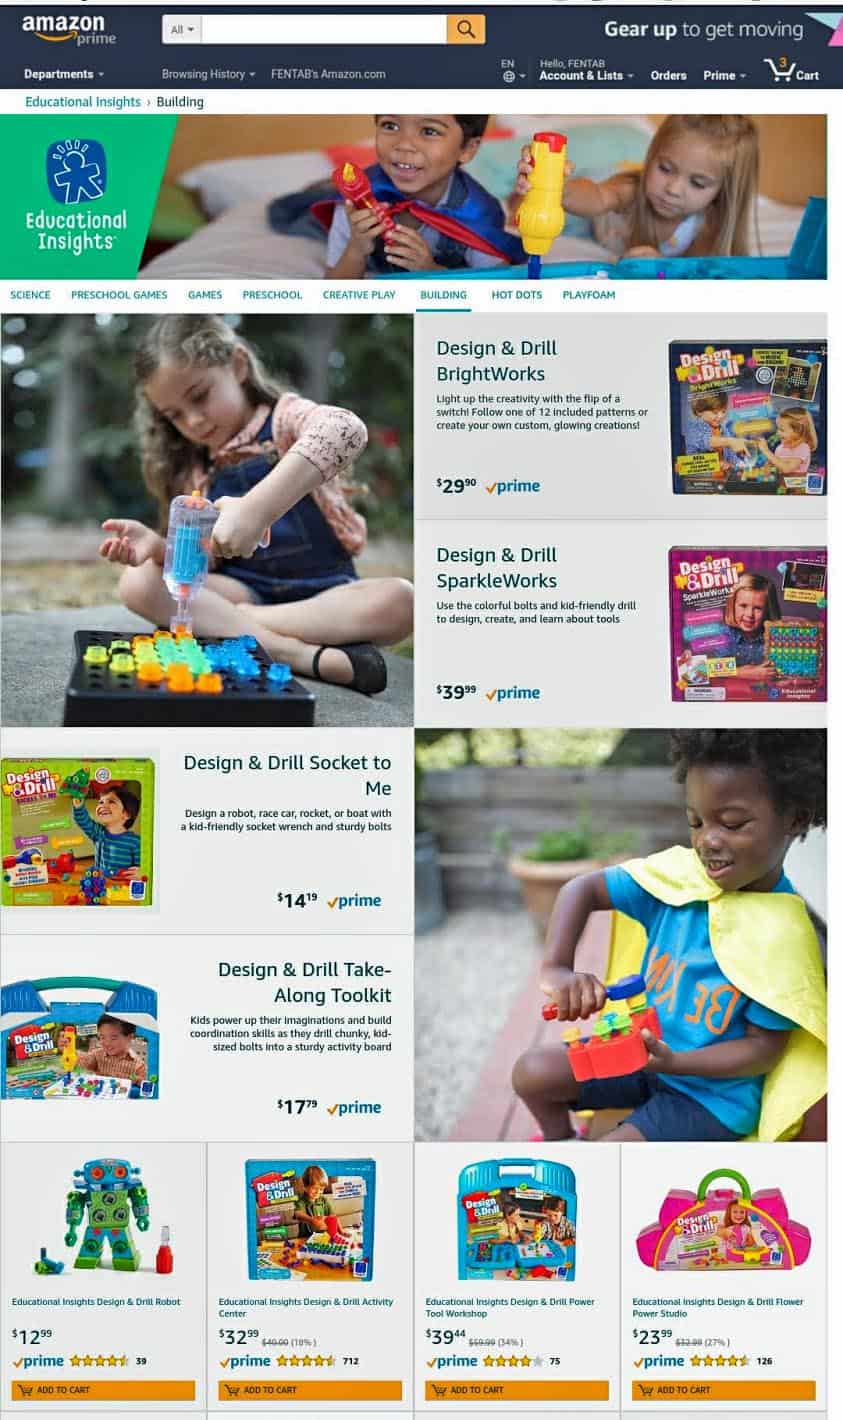 Amazon advertisement featuring kid models. - What Are The Best Model And Talent Agencies For Kids In Los Angeles